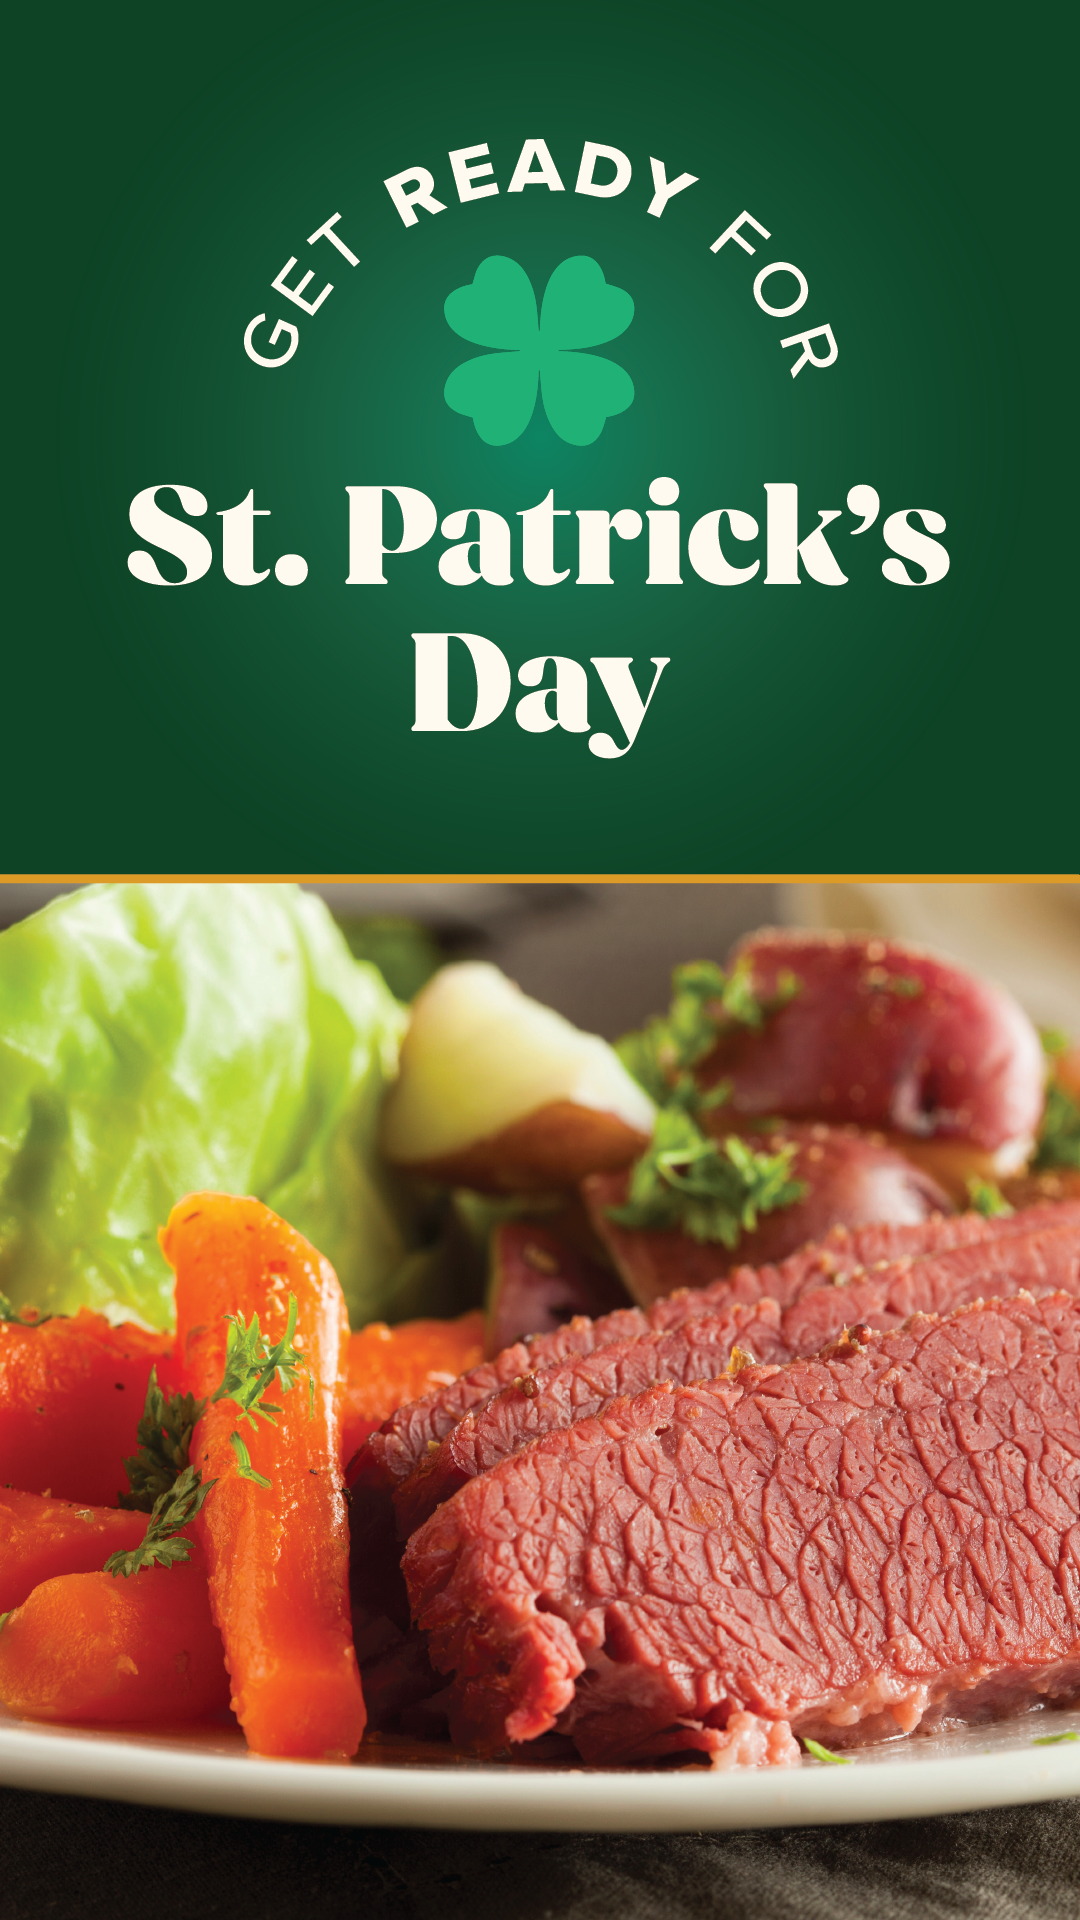 St. Patrick's Day Products